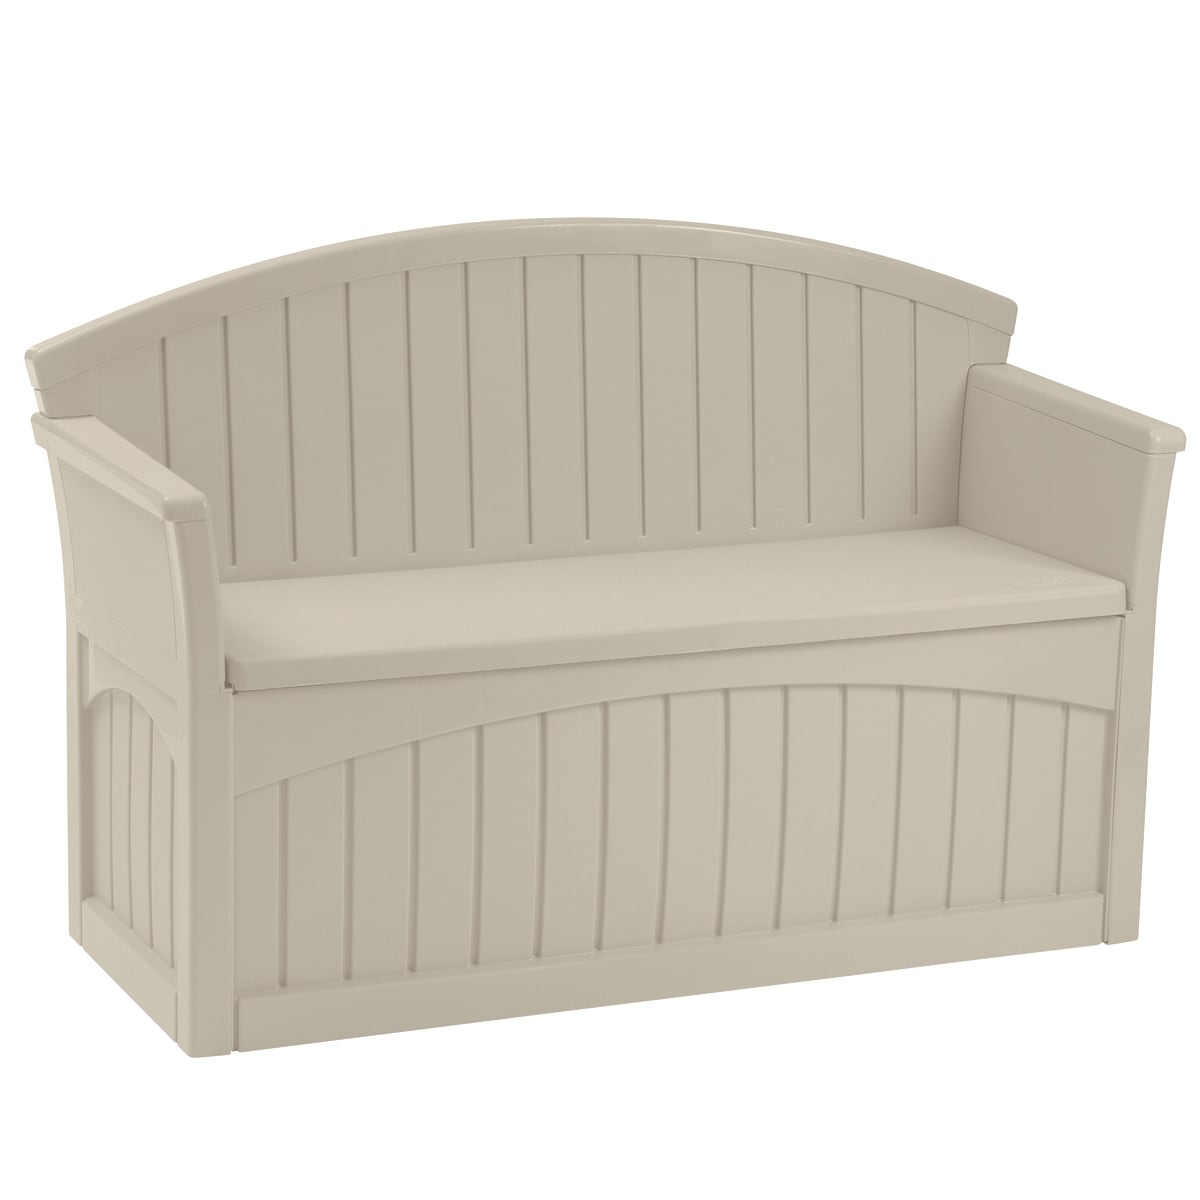 Patio Bench In The Benches, Suncast 50 Gallon Patio Storage Bench Pb6700